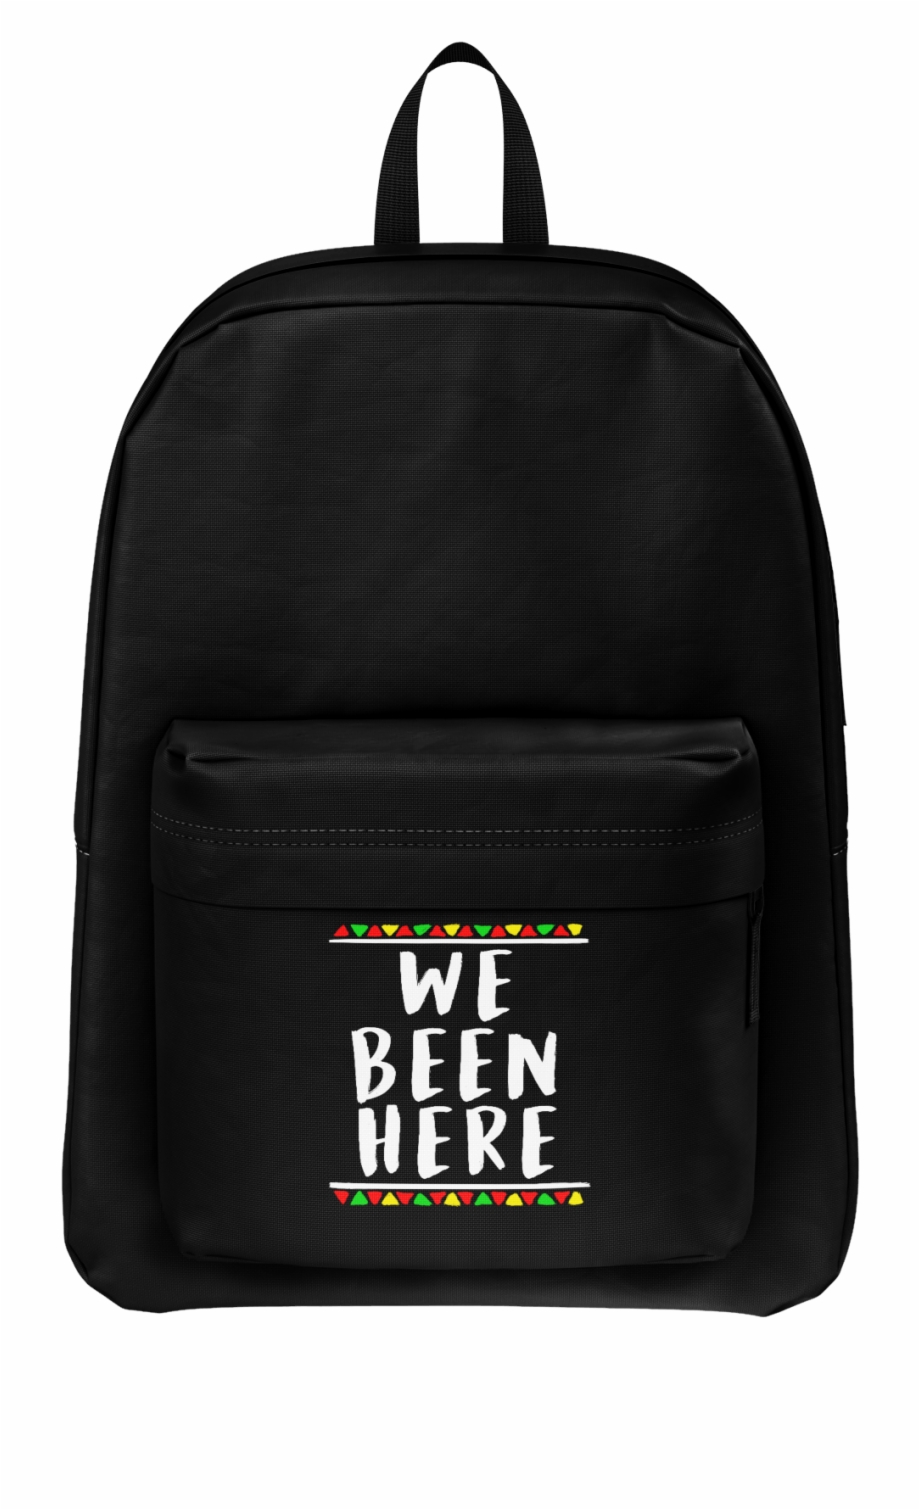 Clipart backpack backpack lunchbox. Bags lunch box h